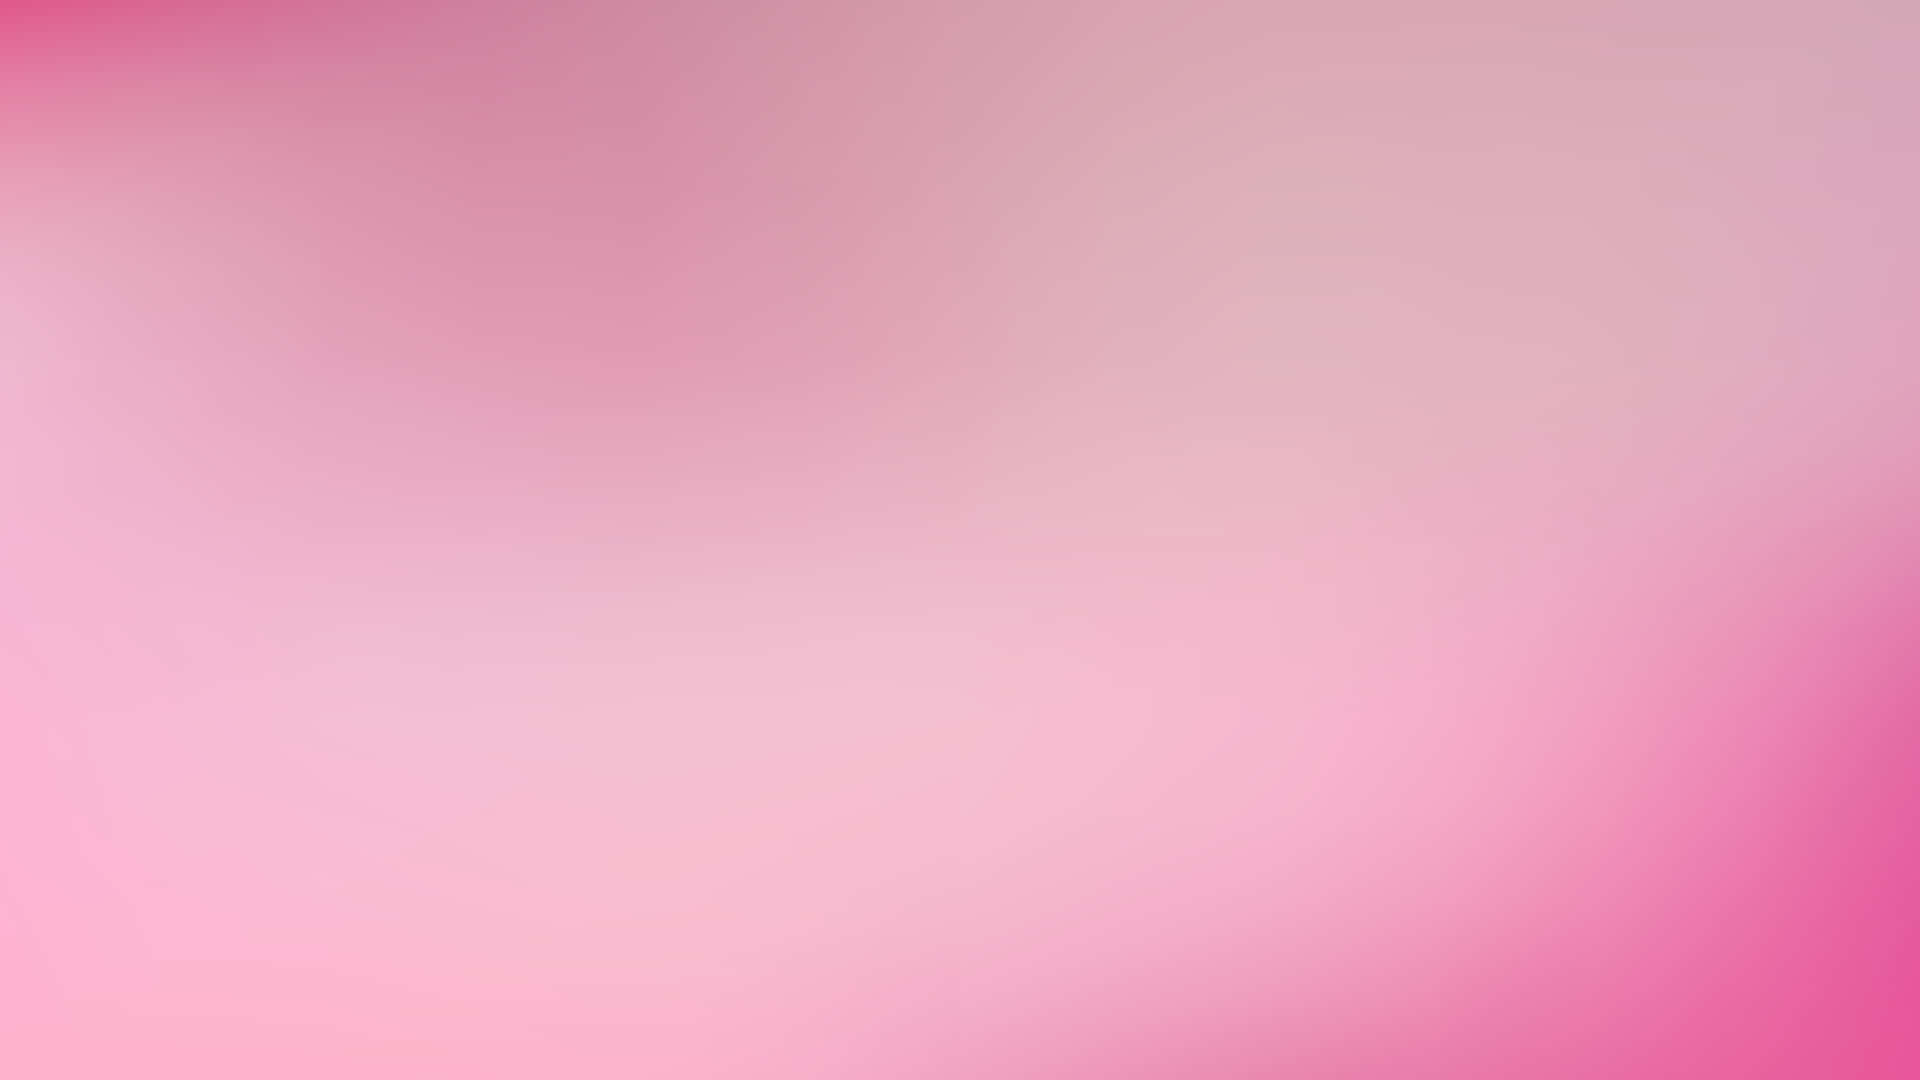 Simple Light Pink Blurred Background